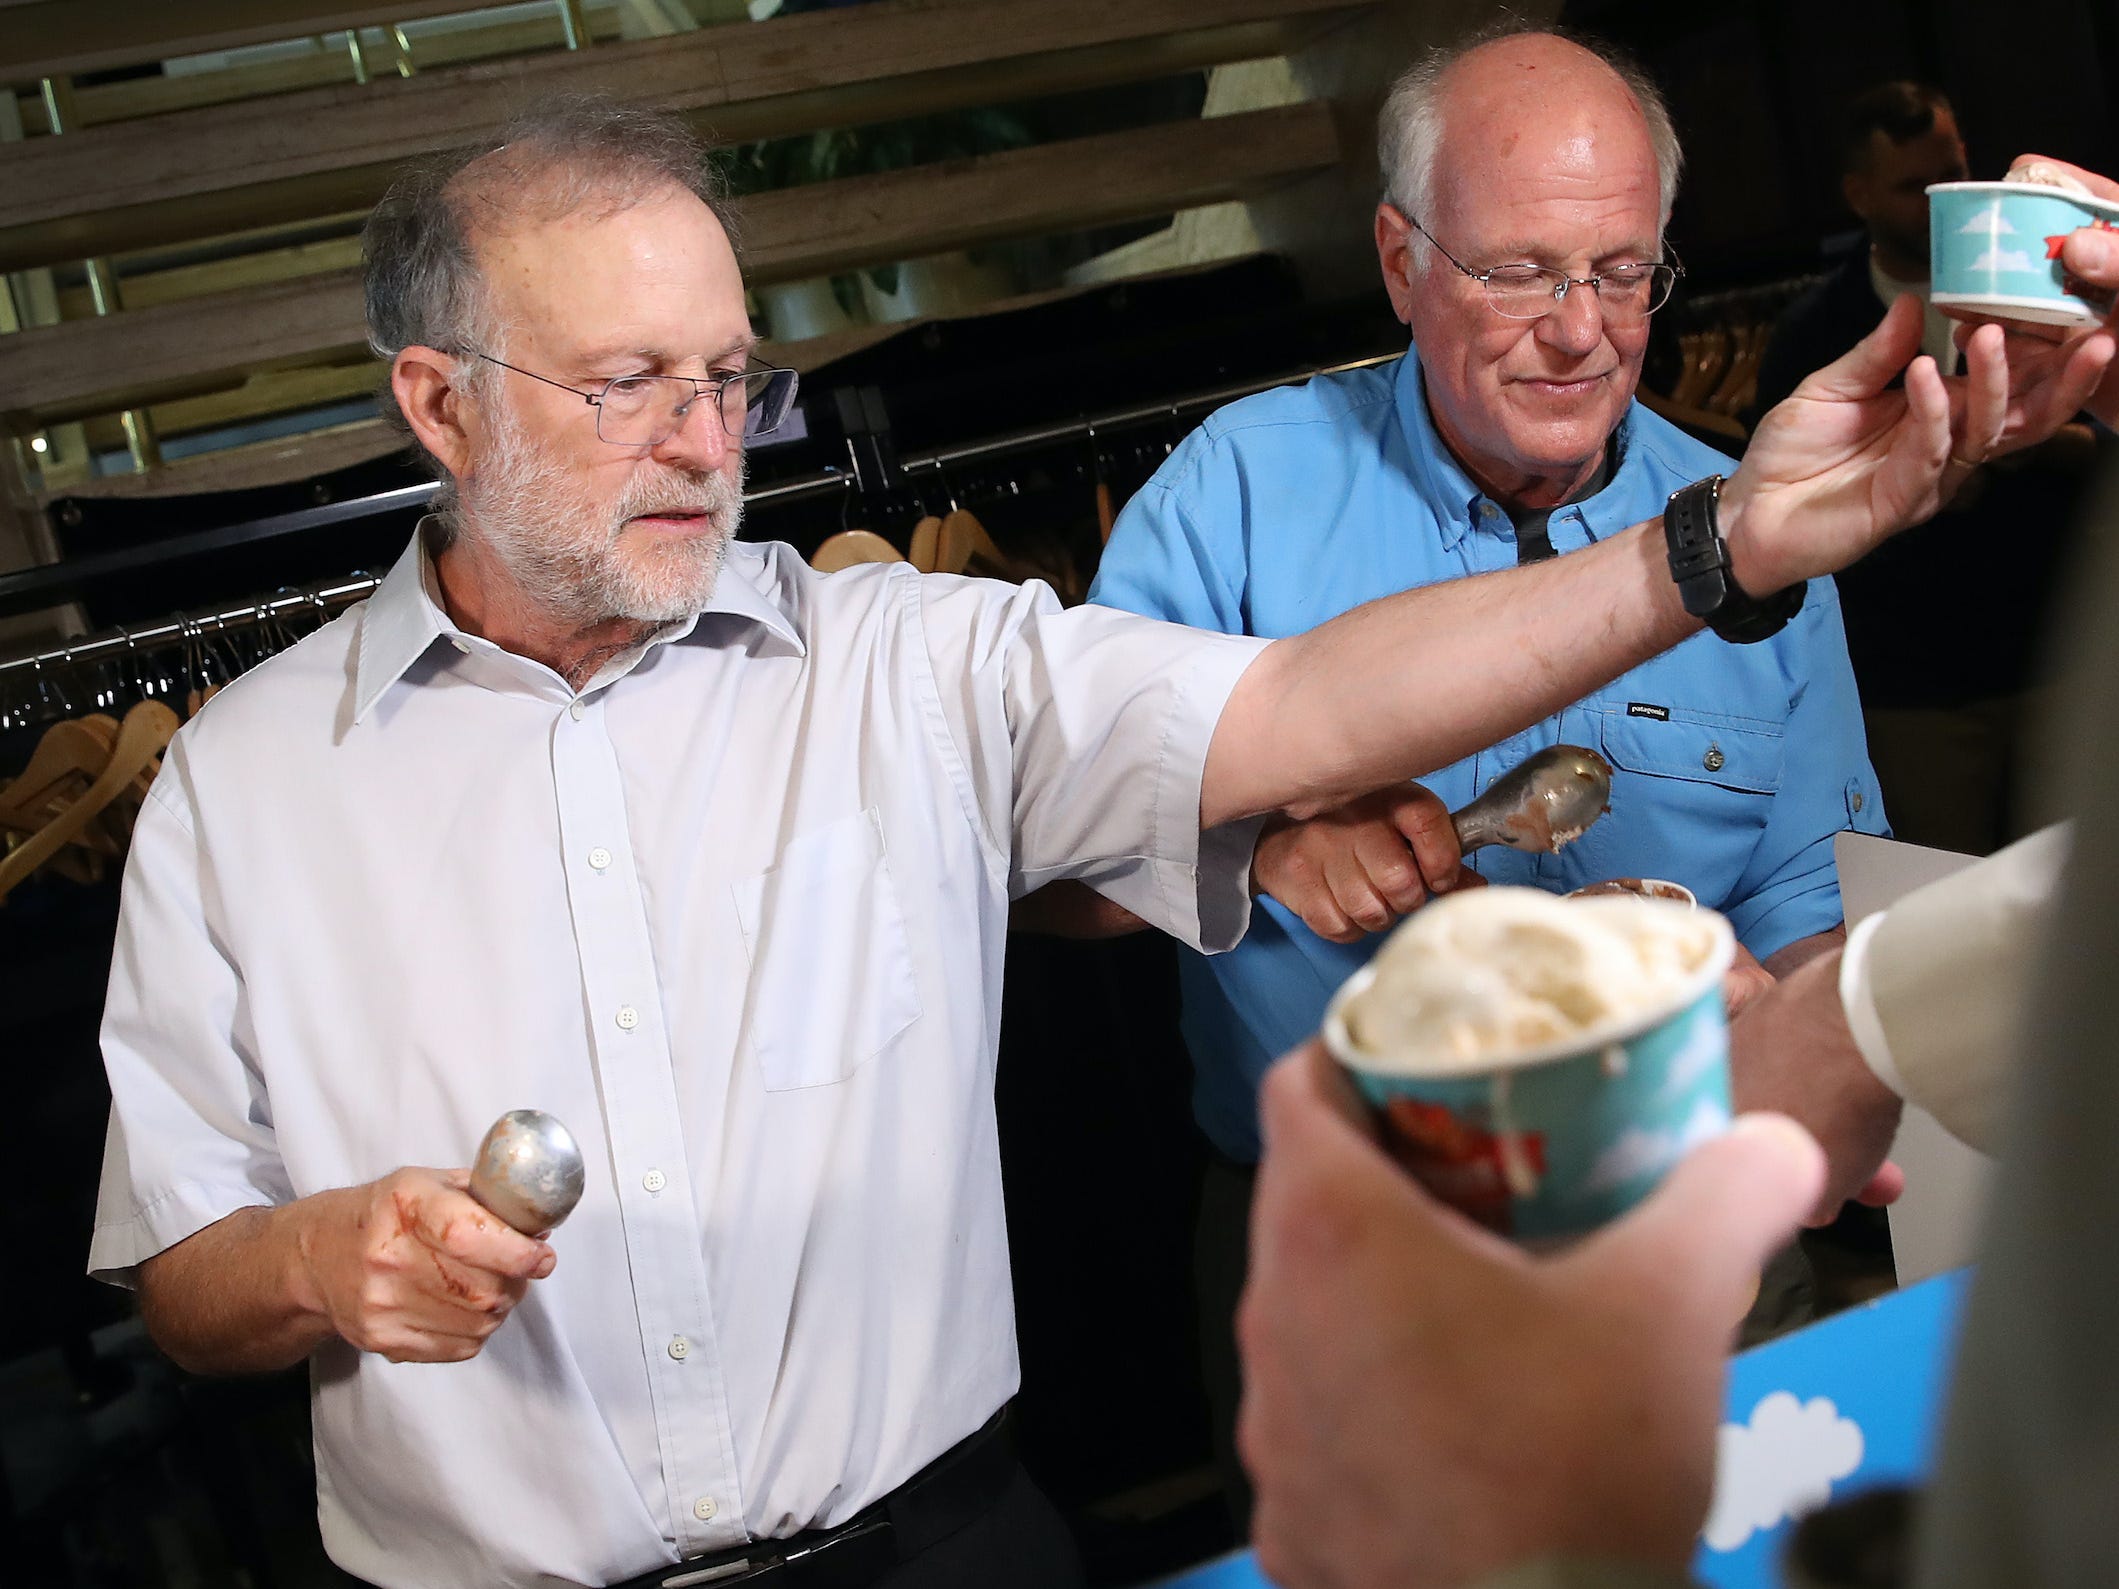 Ben & Jerry's co-founders Ben Cohen (R) and Jerry Greenfield (L) serve ice cream following a press conference announcing a new flavor, Justice Remix'd.